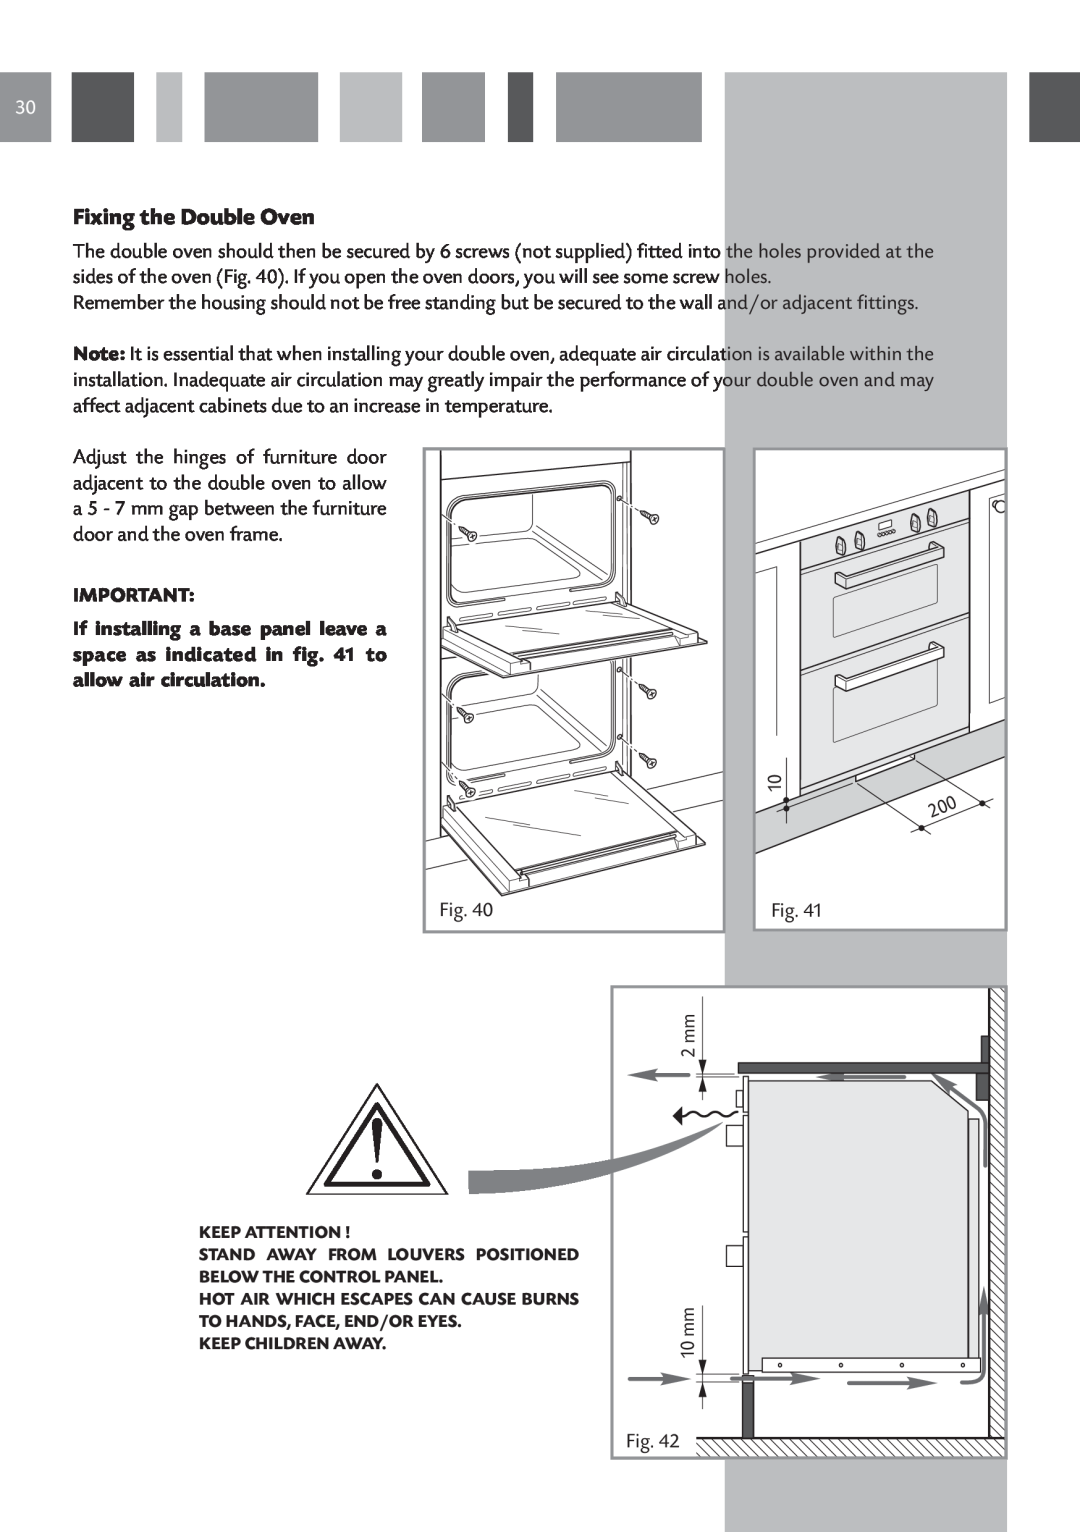 CDA DC730 manual Fixing the Double Oven 